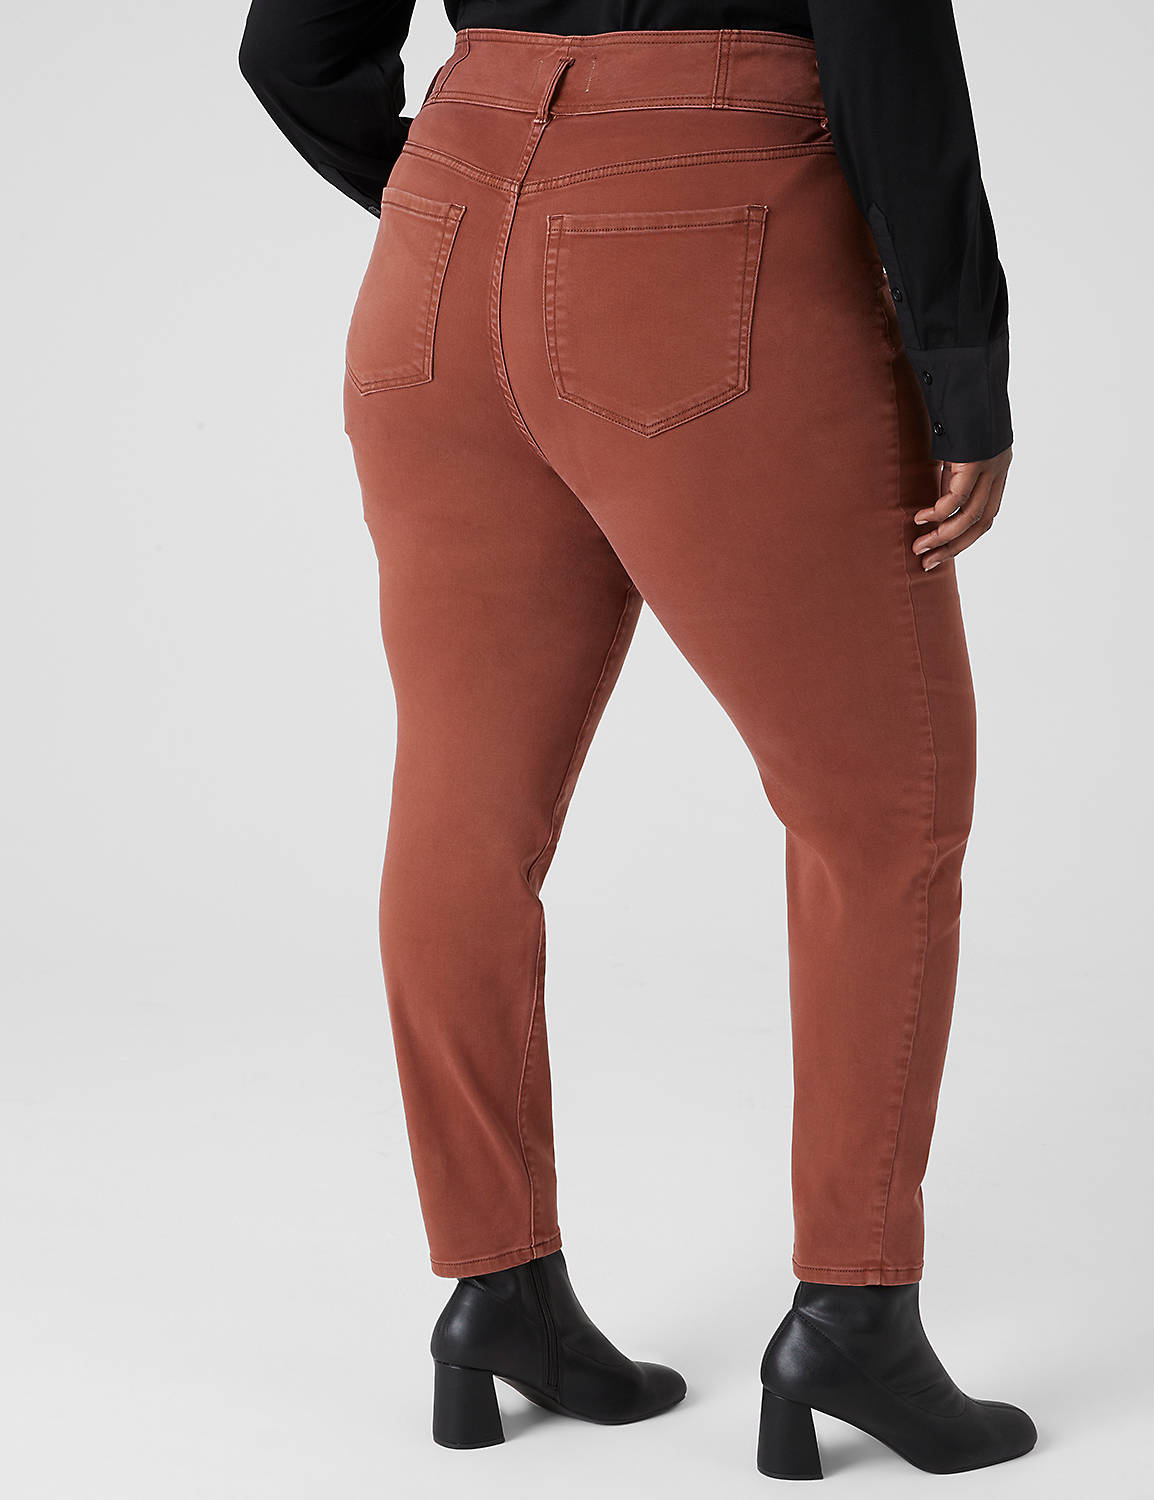 ULTRA HIGH RISE JEGGING - COLOR SAT Product Image 2